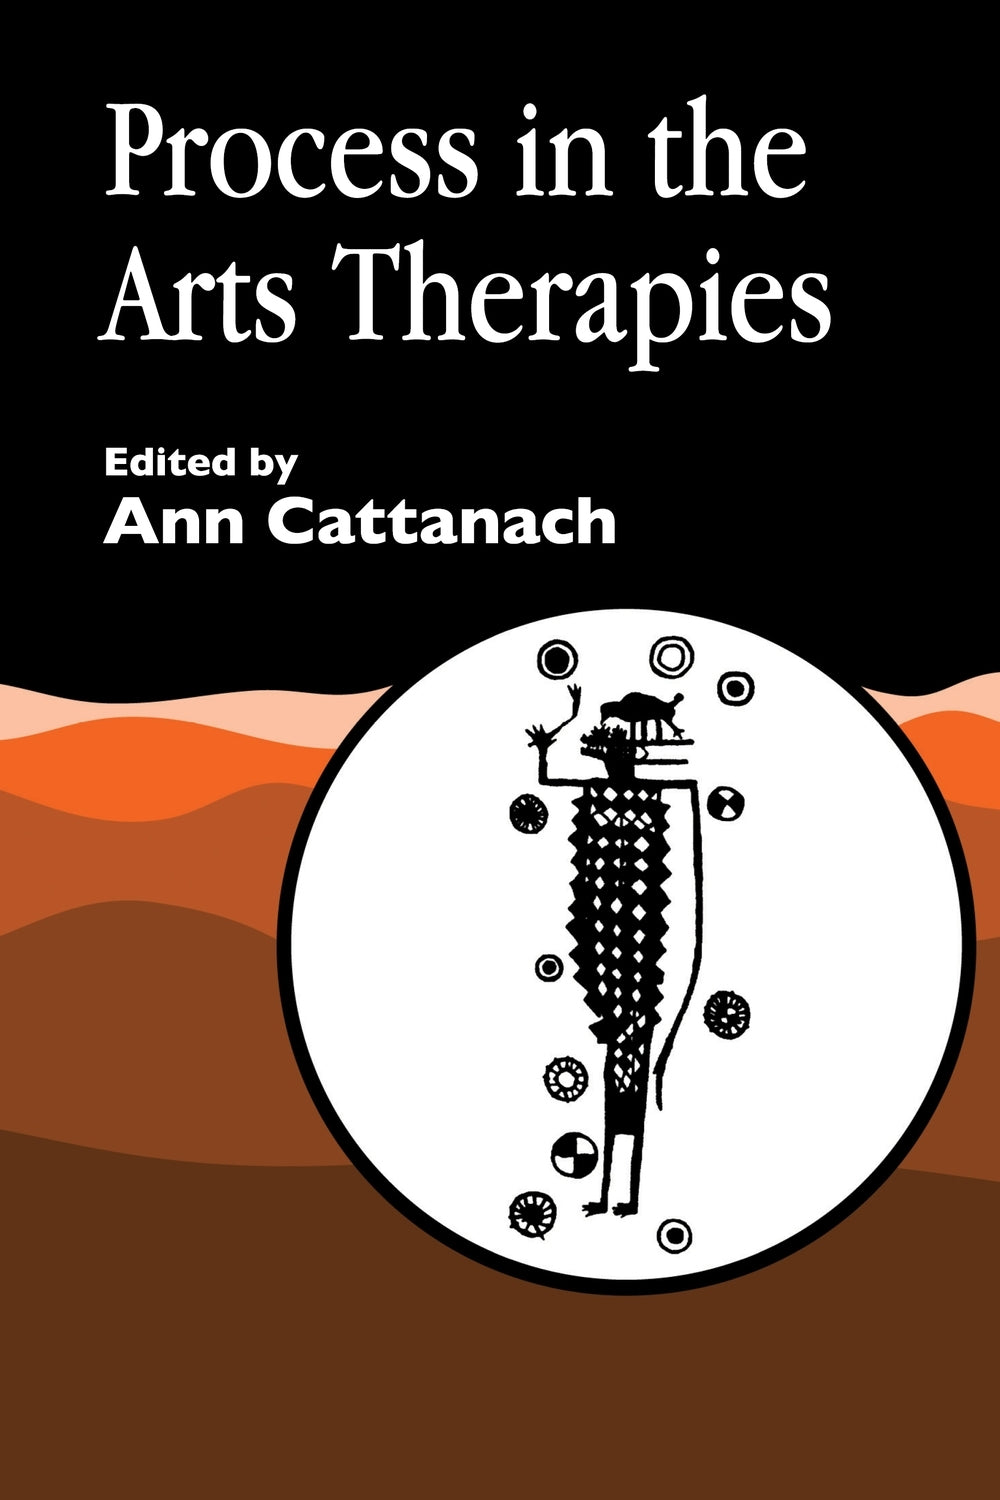 Process in the Arts Therapies by No Author Listed, Ann Cattanach